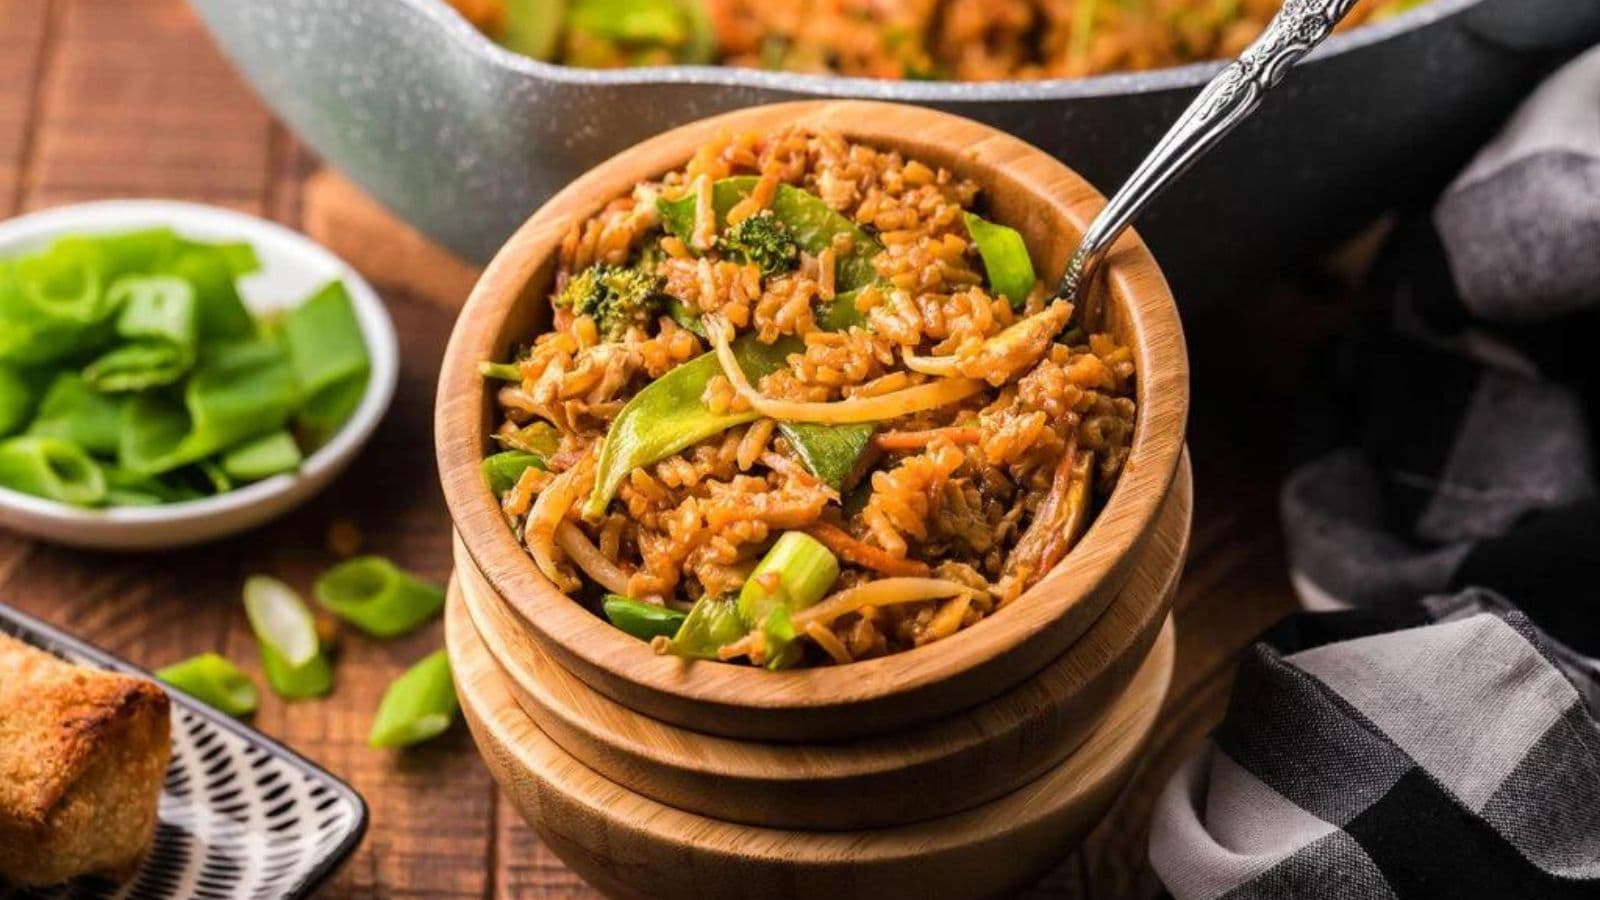 A bowl of fried rice with broccoli and snap peas.